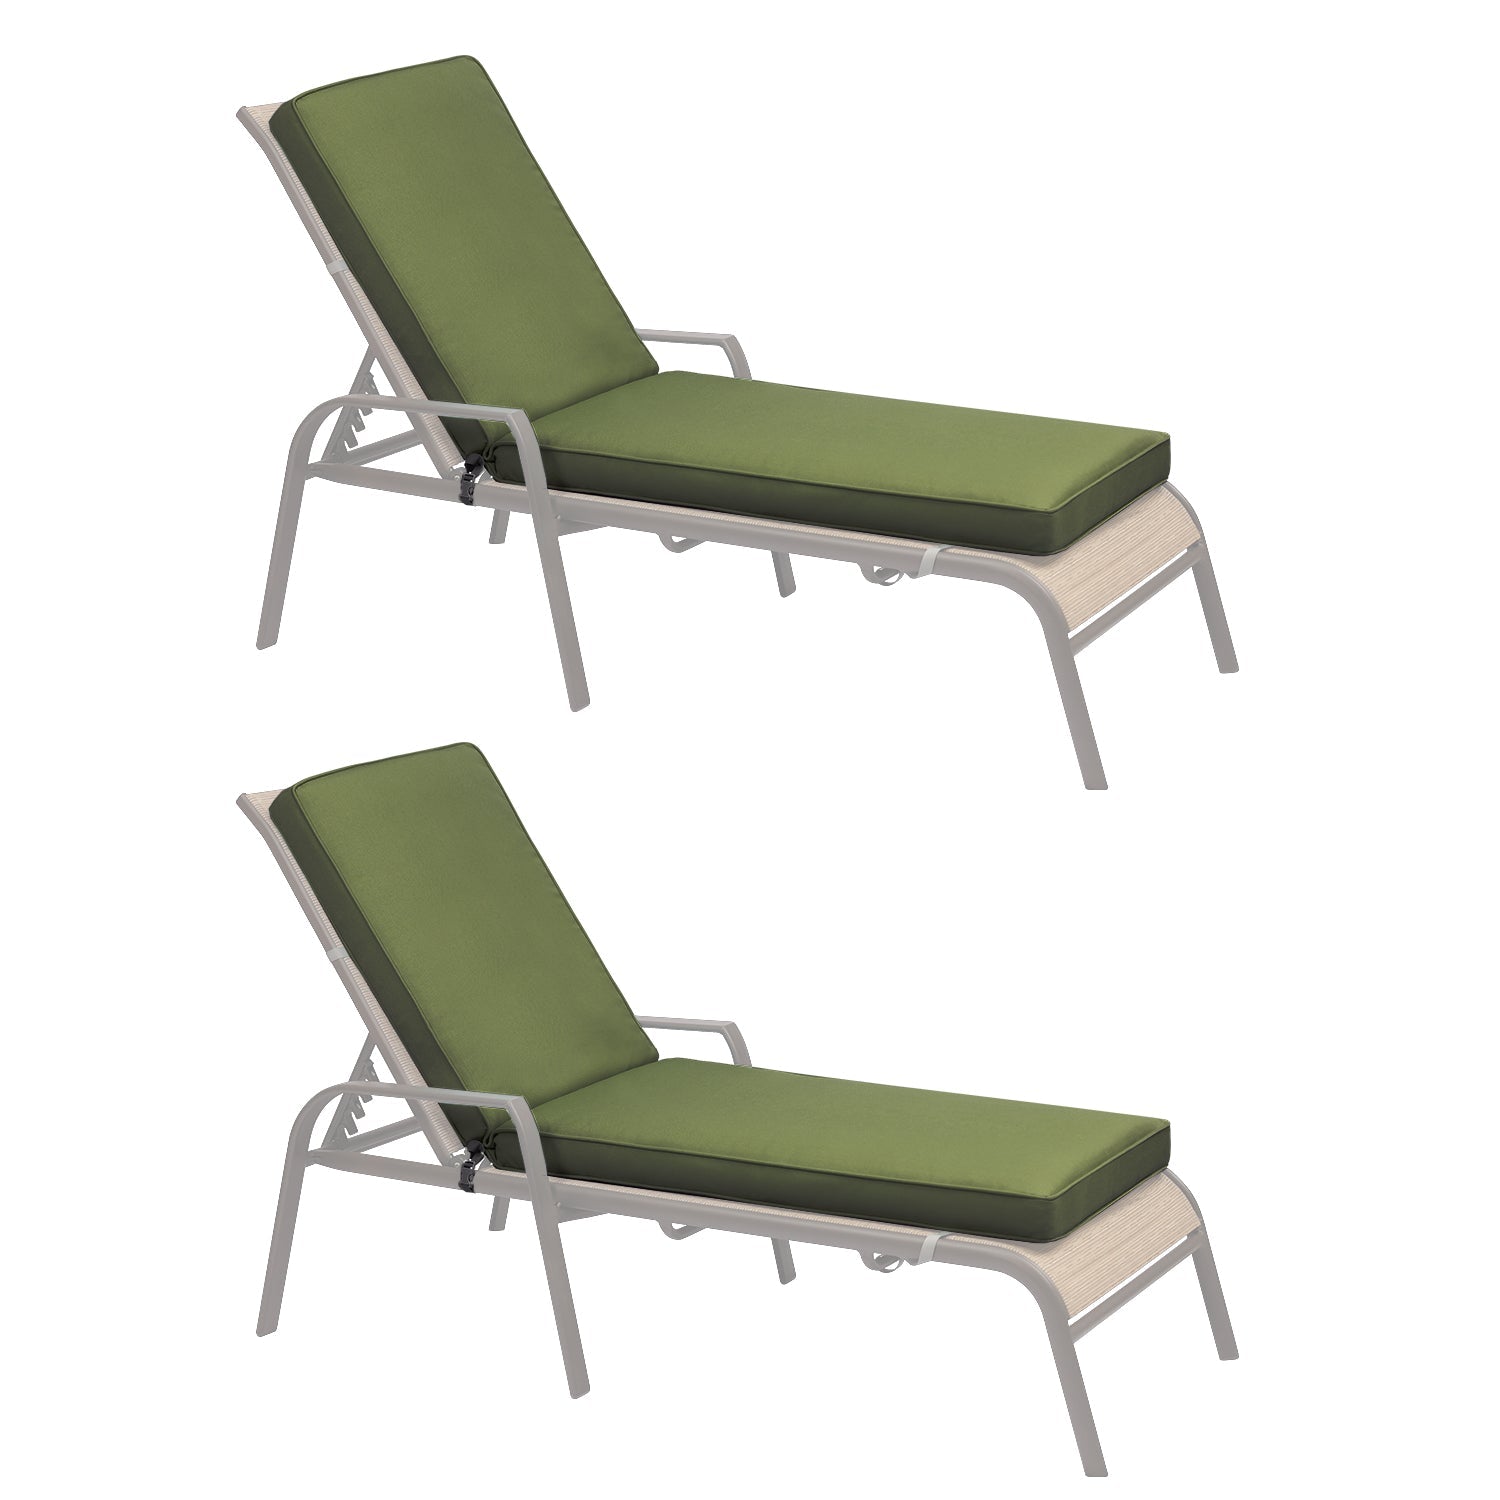 Patio Chaise Lounger Cushions Set of 2, Olefin Fabric, Water-Resistant, 72x21x3 Inches(Only Cushions) CUSHION Aoodor Green  